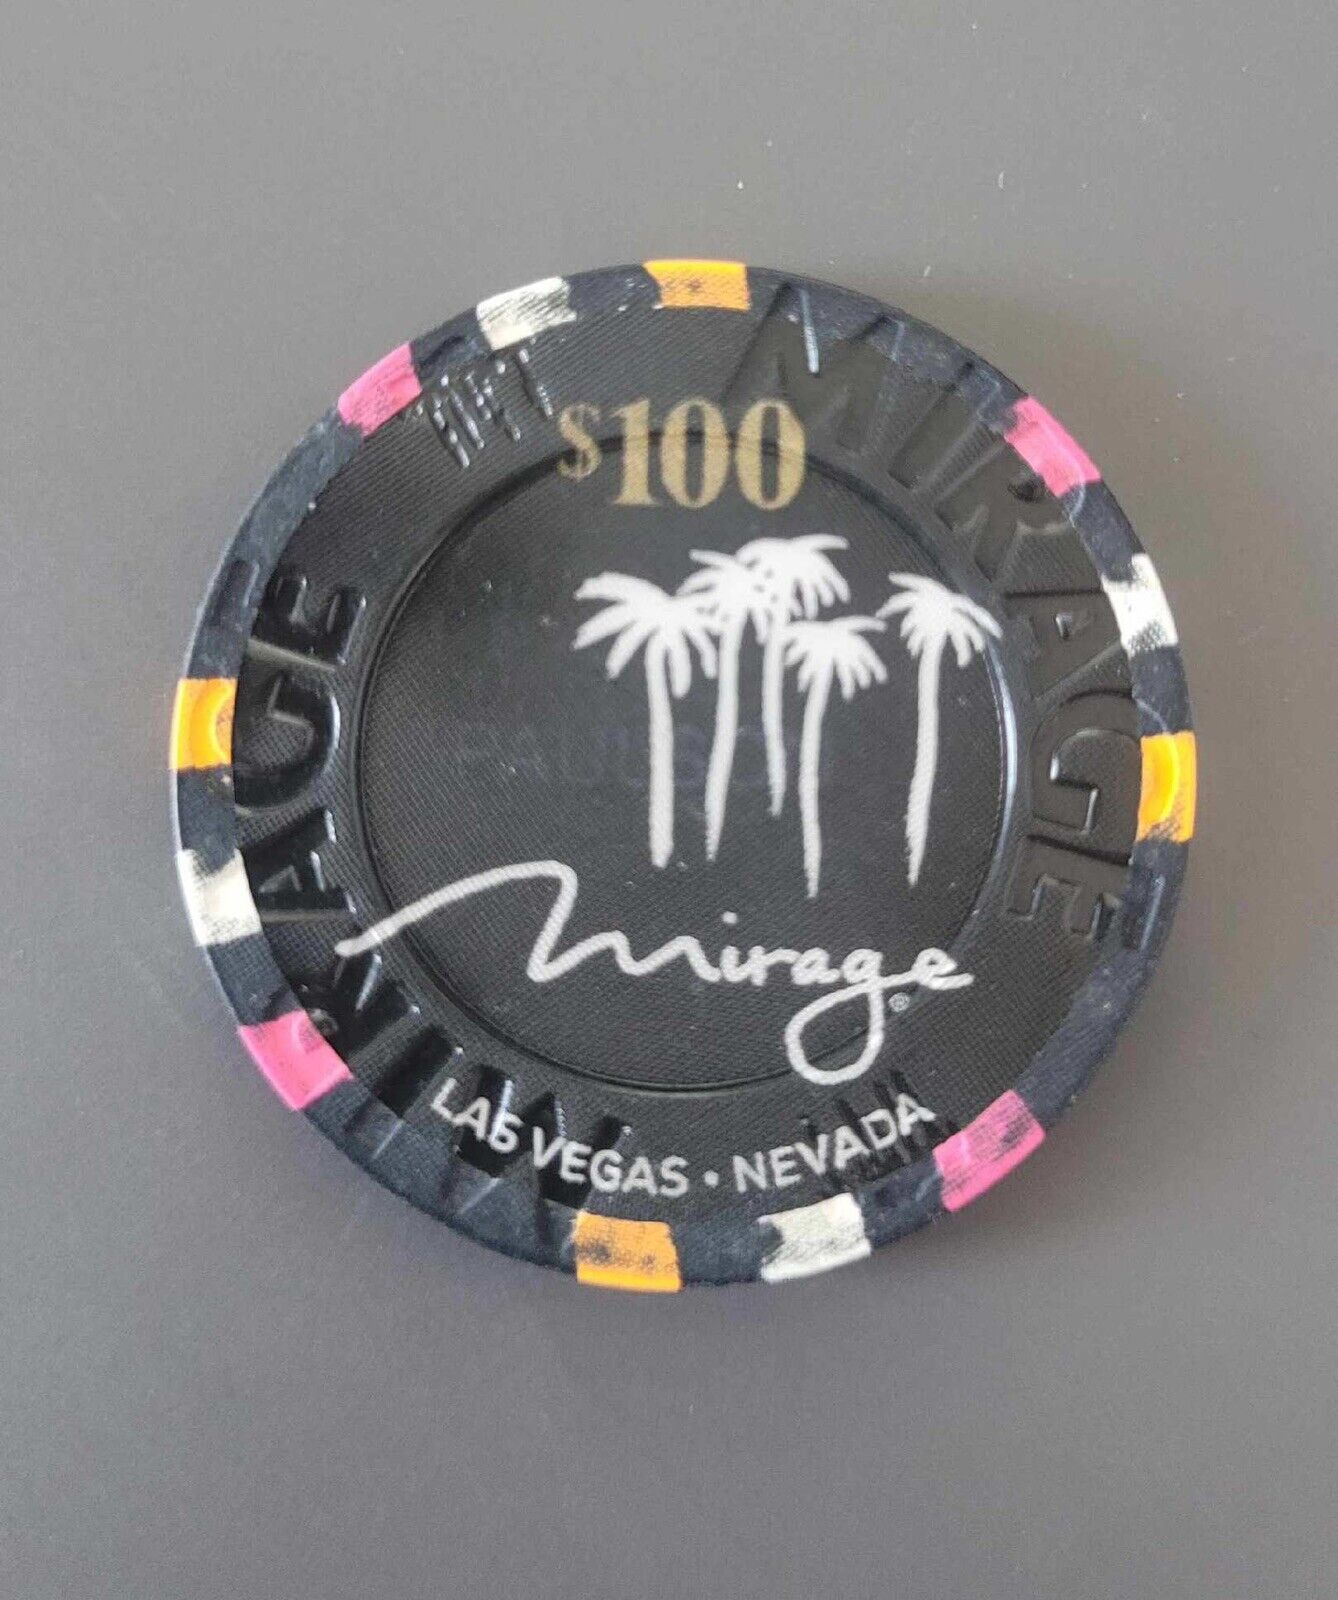 Mirage Las Vegas $100 Casino Chip. Limited Edition Golden Knights Stands On Edge